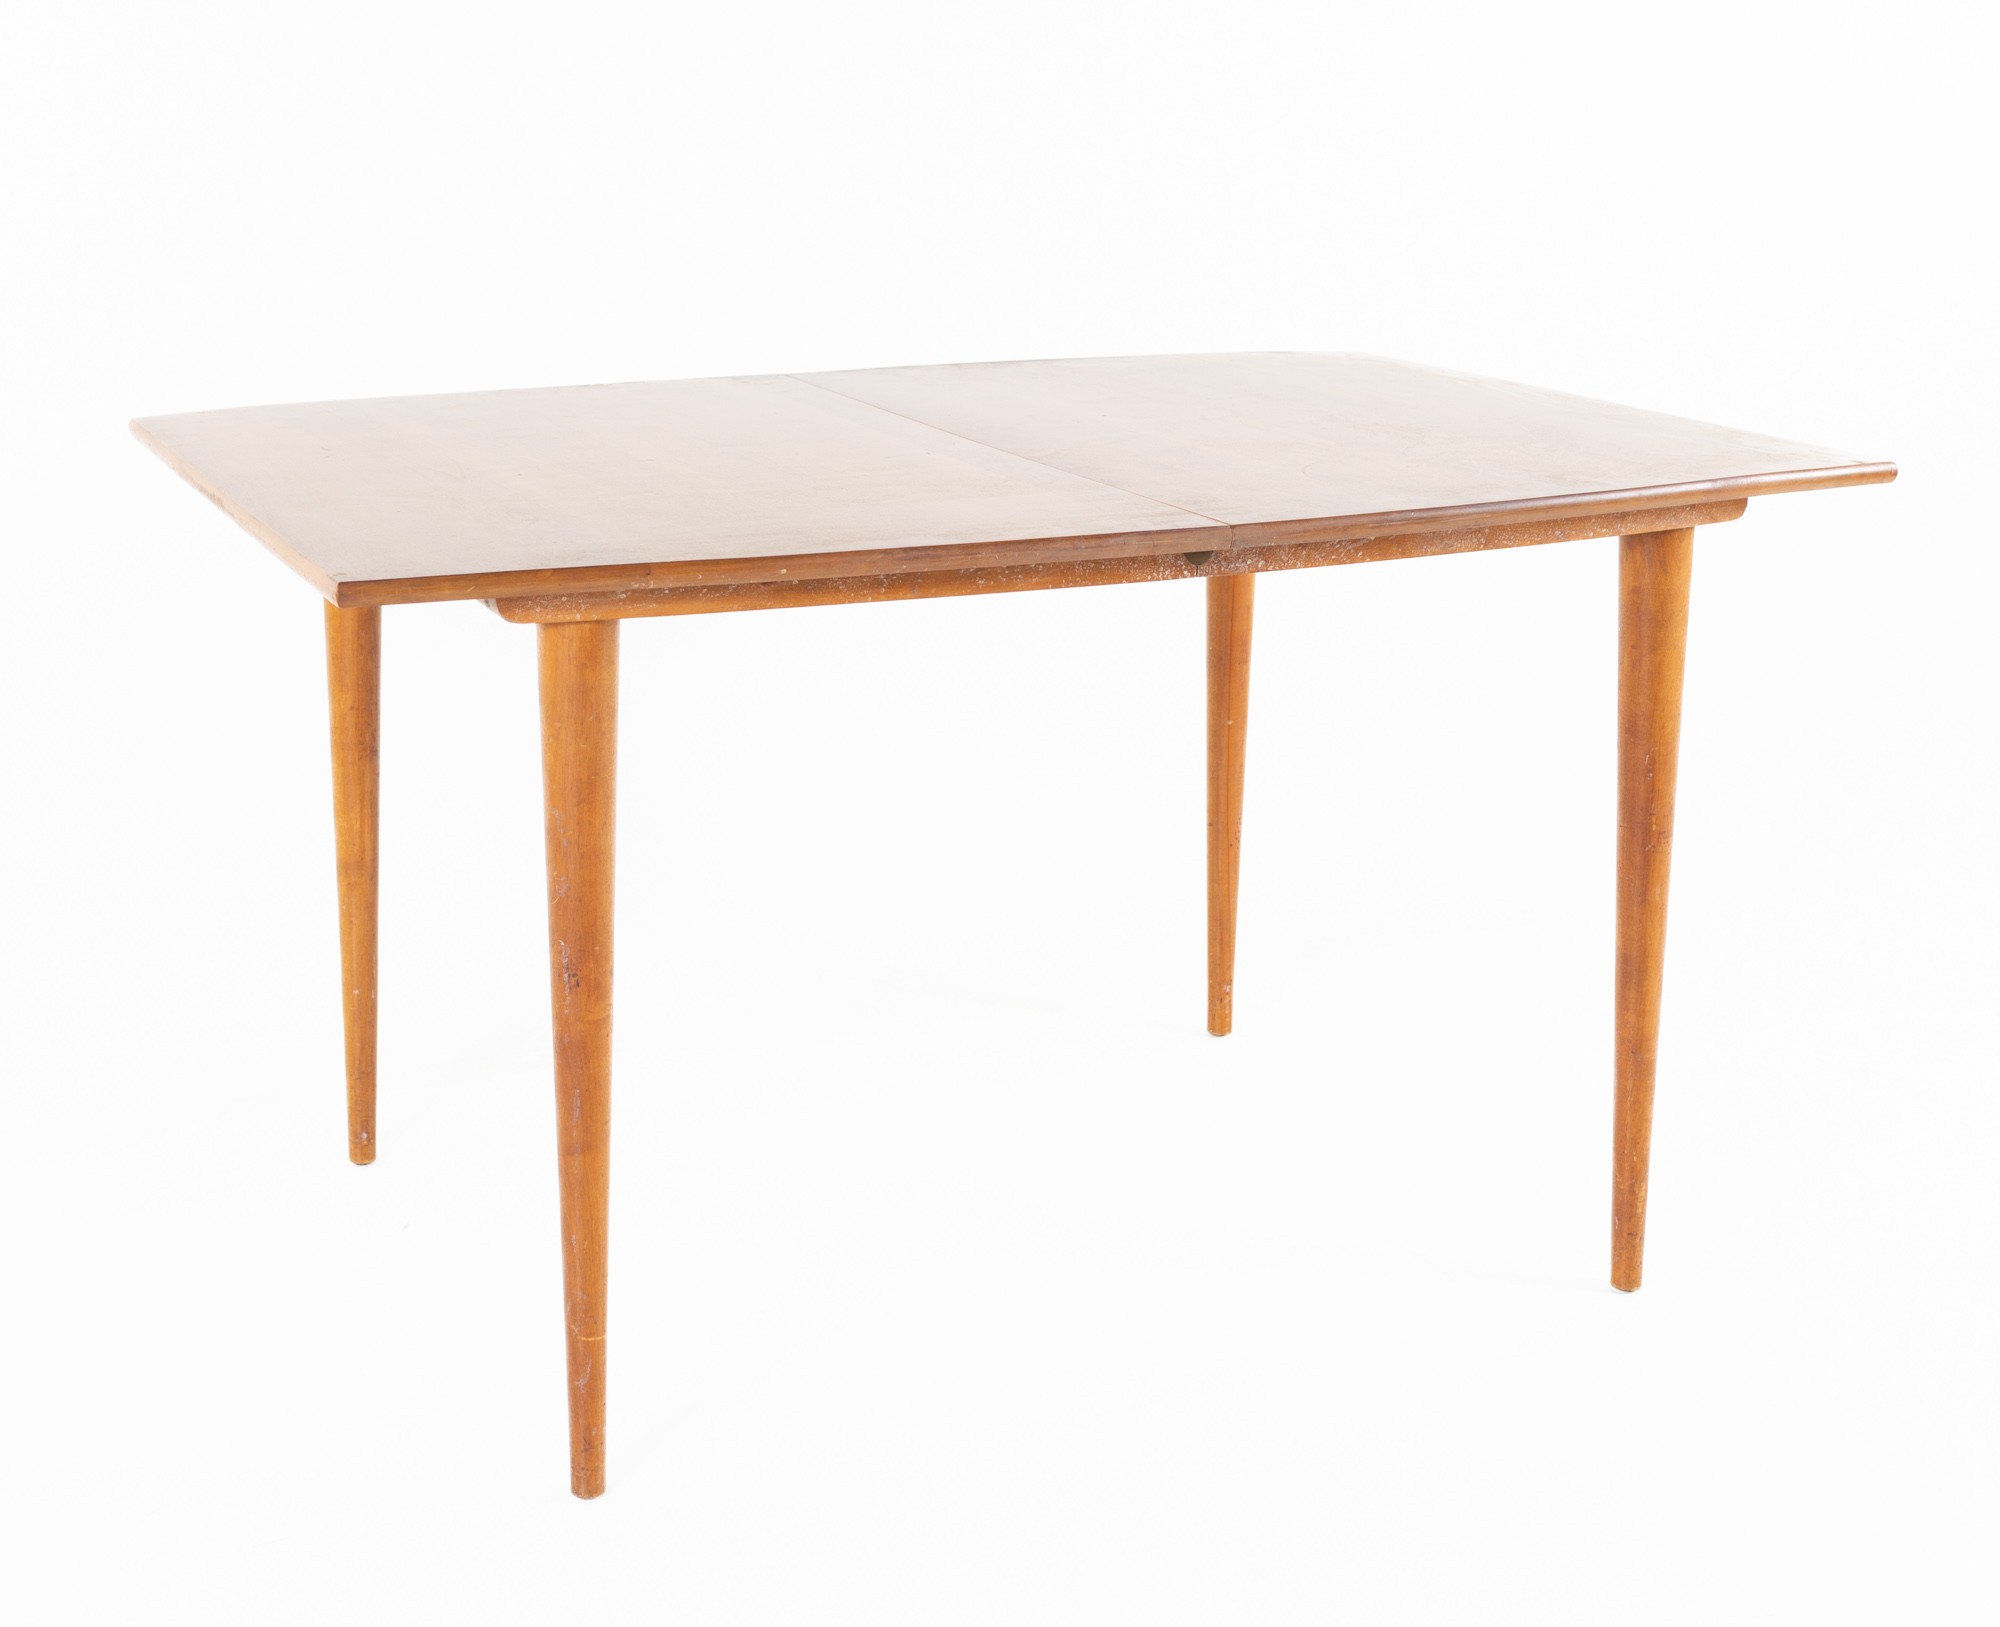 Conant Ball Style Mid Century Blond Rectangular Dining Table with Peg Legs